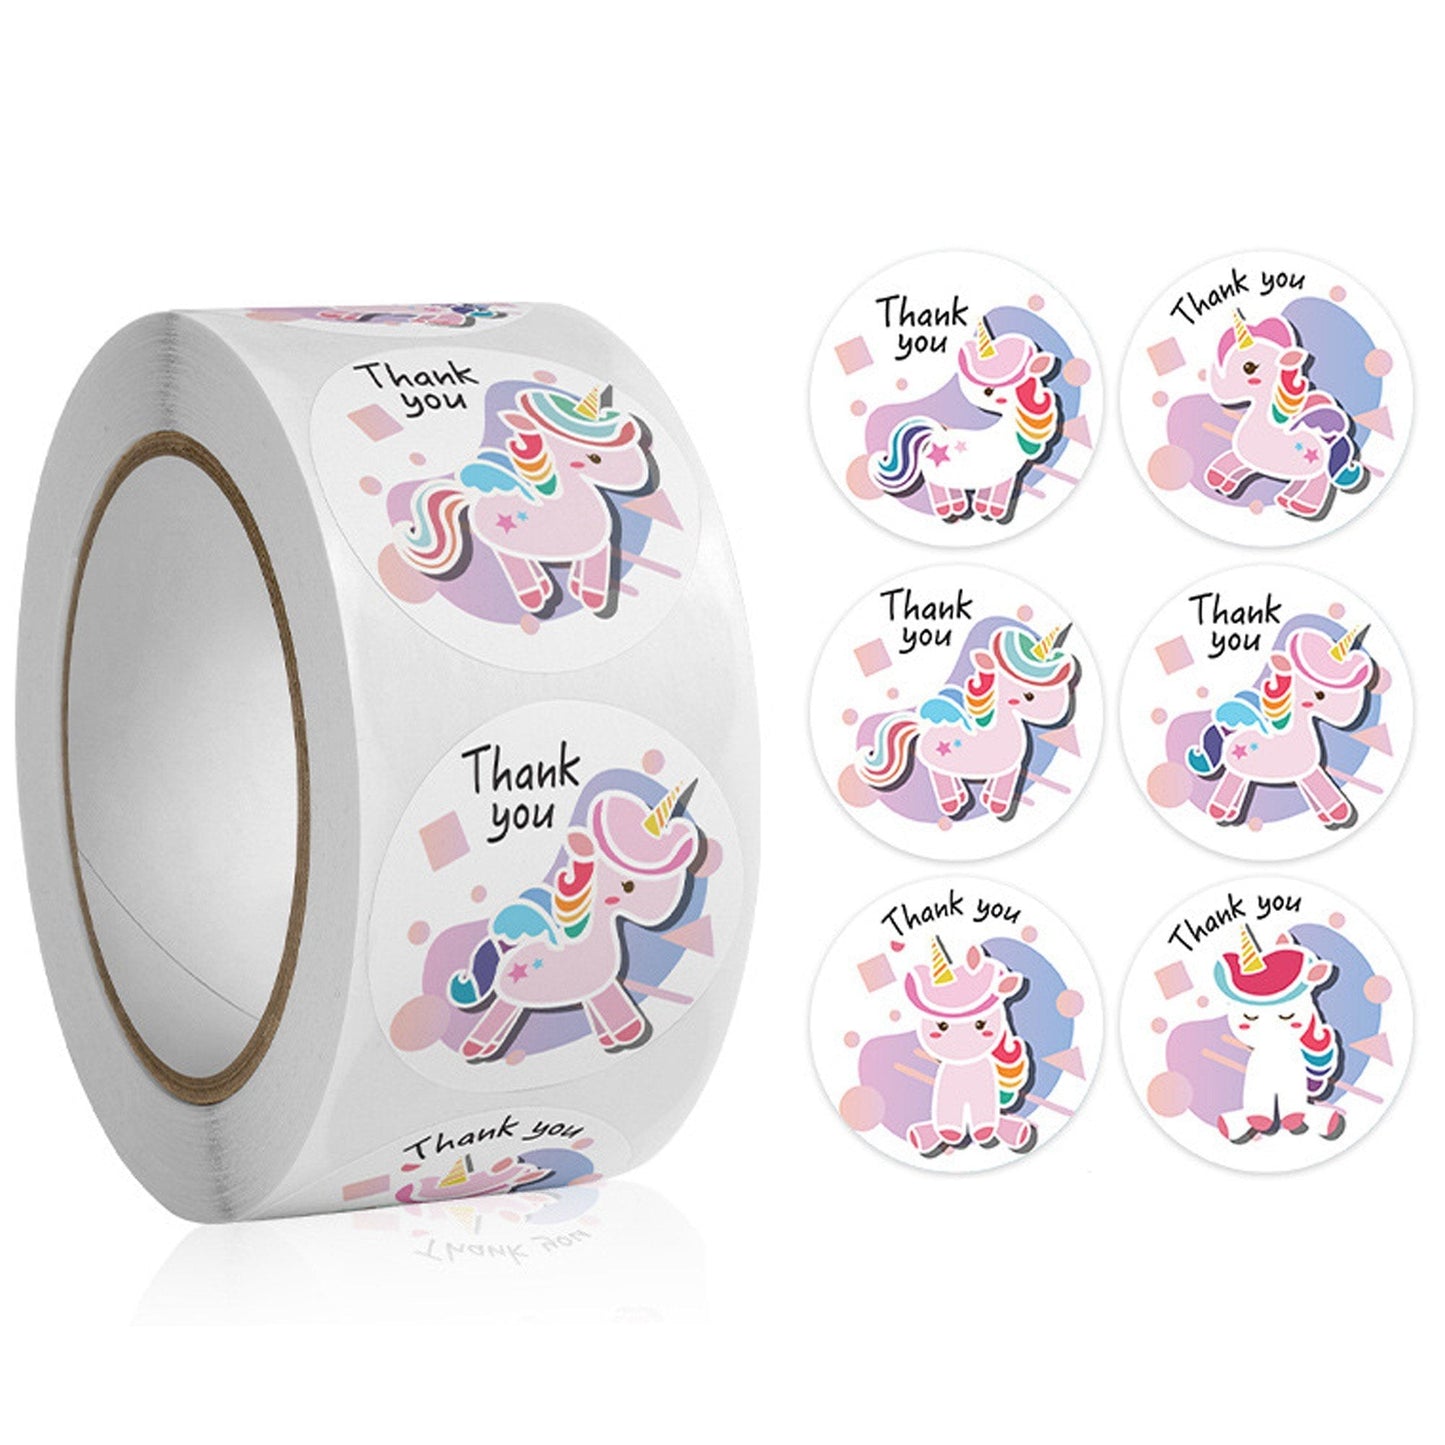 1 Roll 500pcs Unicorn Party Thank You Sticker Label Self Adhesive 6 Designs 25mm